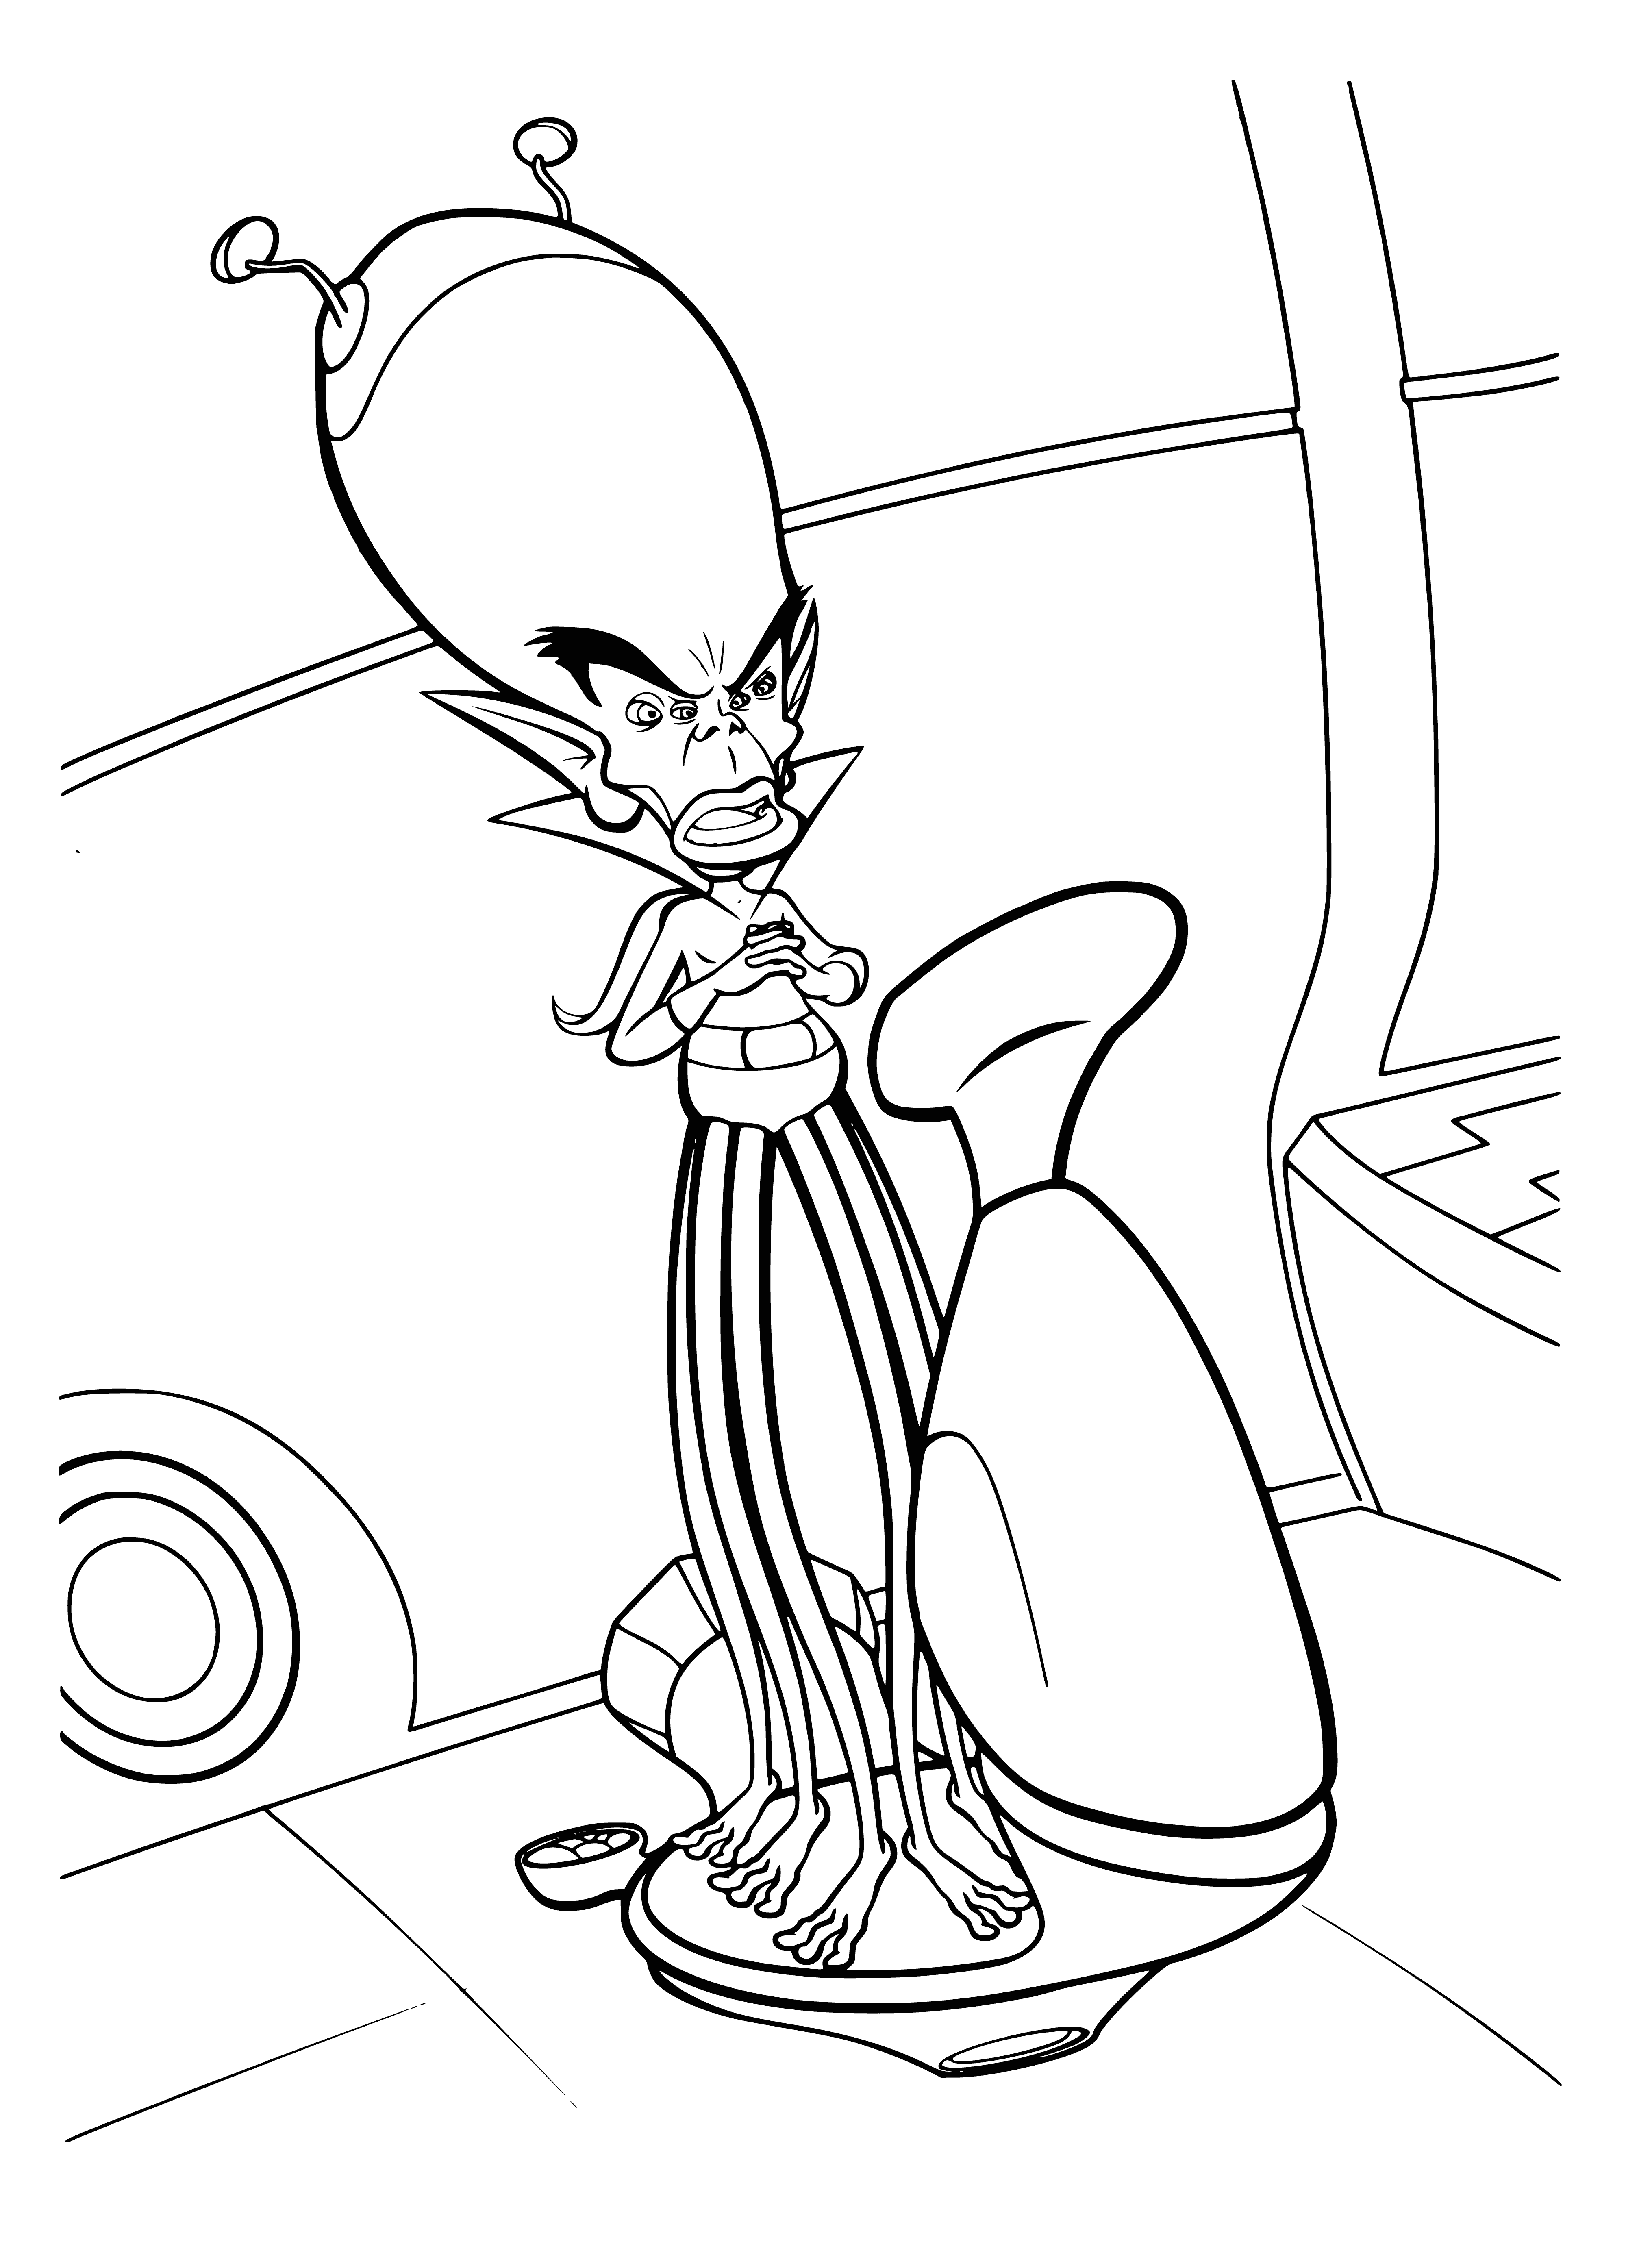 coloring page: Giant purple alien creature w/ multiple eyes, teeth & arms floats in space in front of a large red planet. #monstersvsaliens